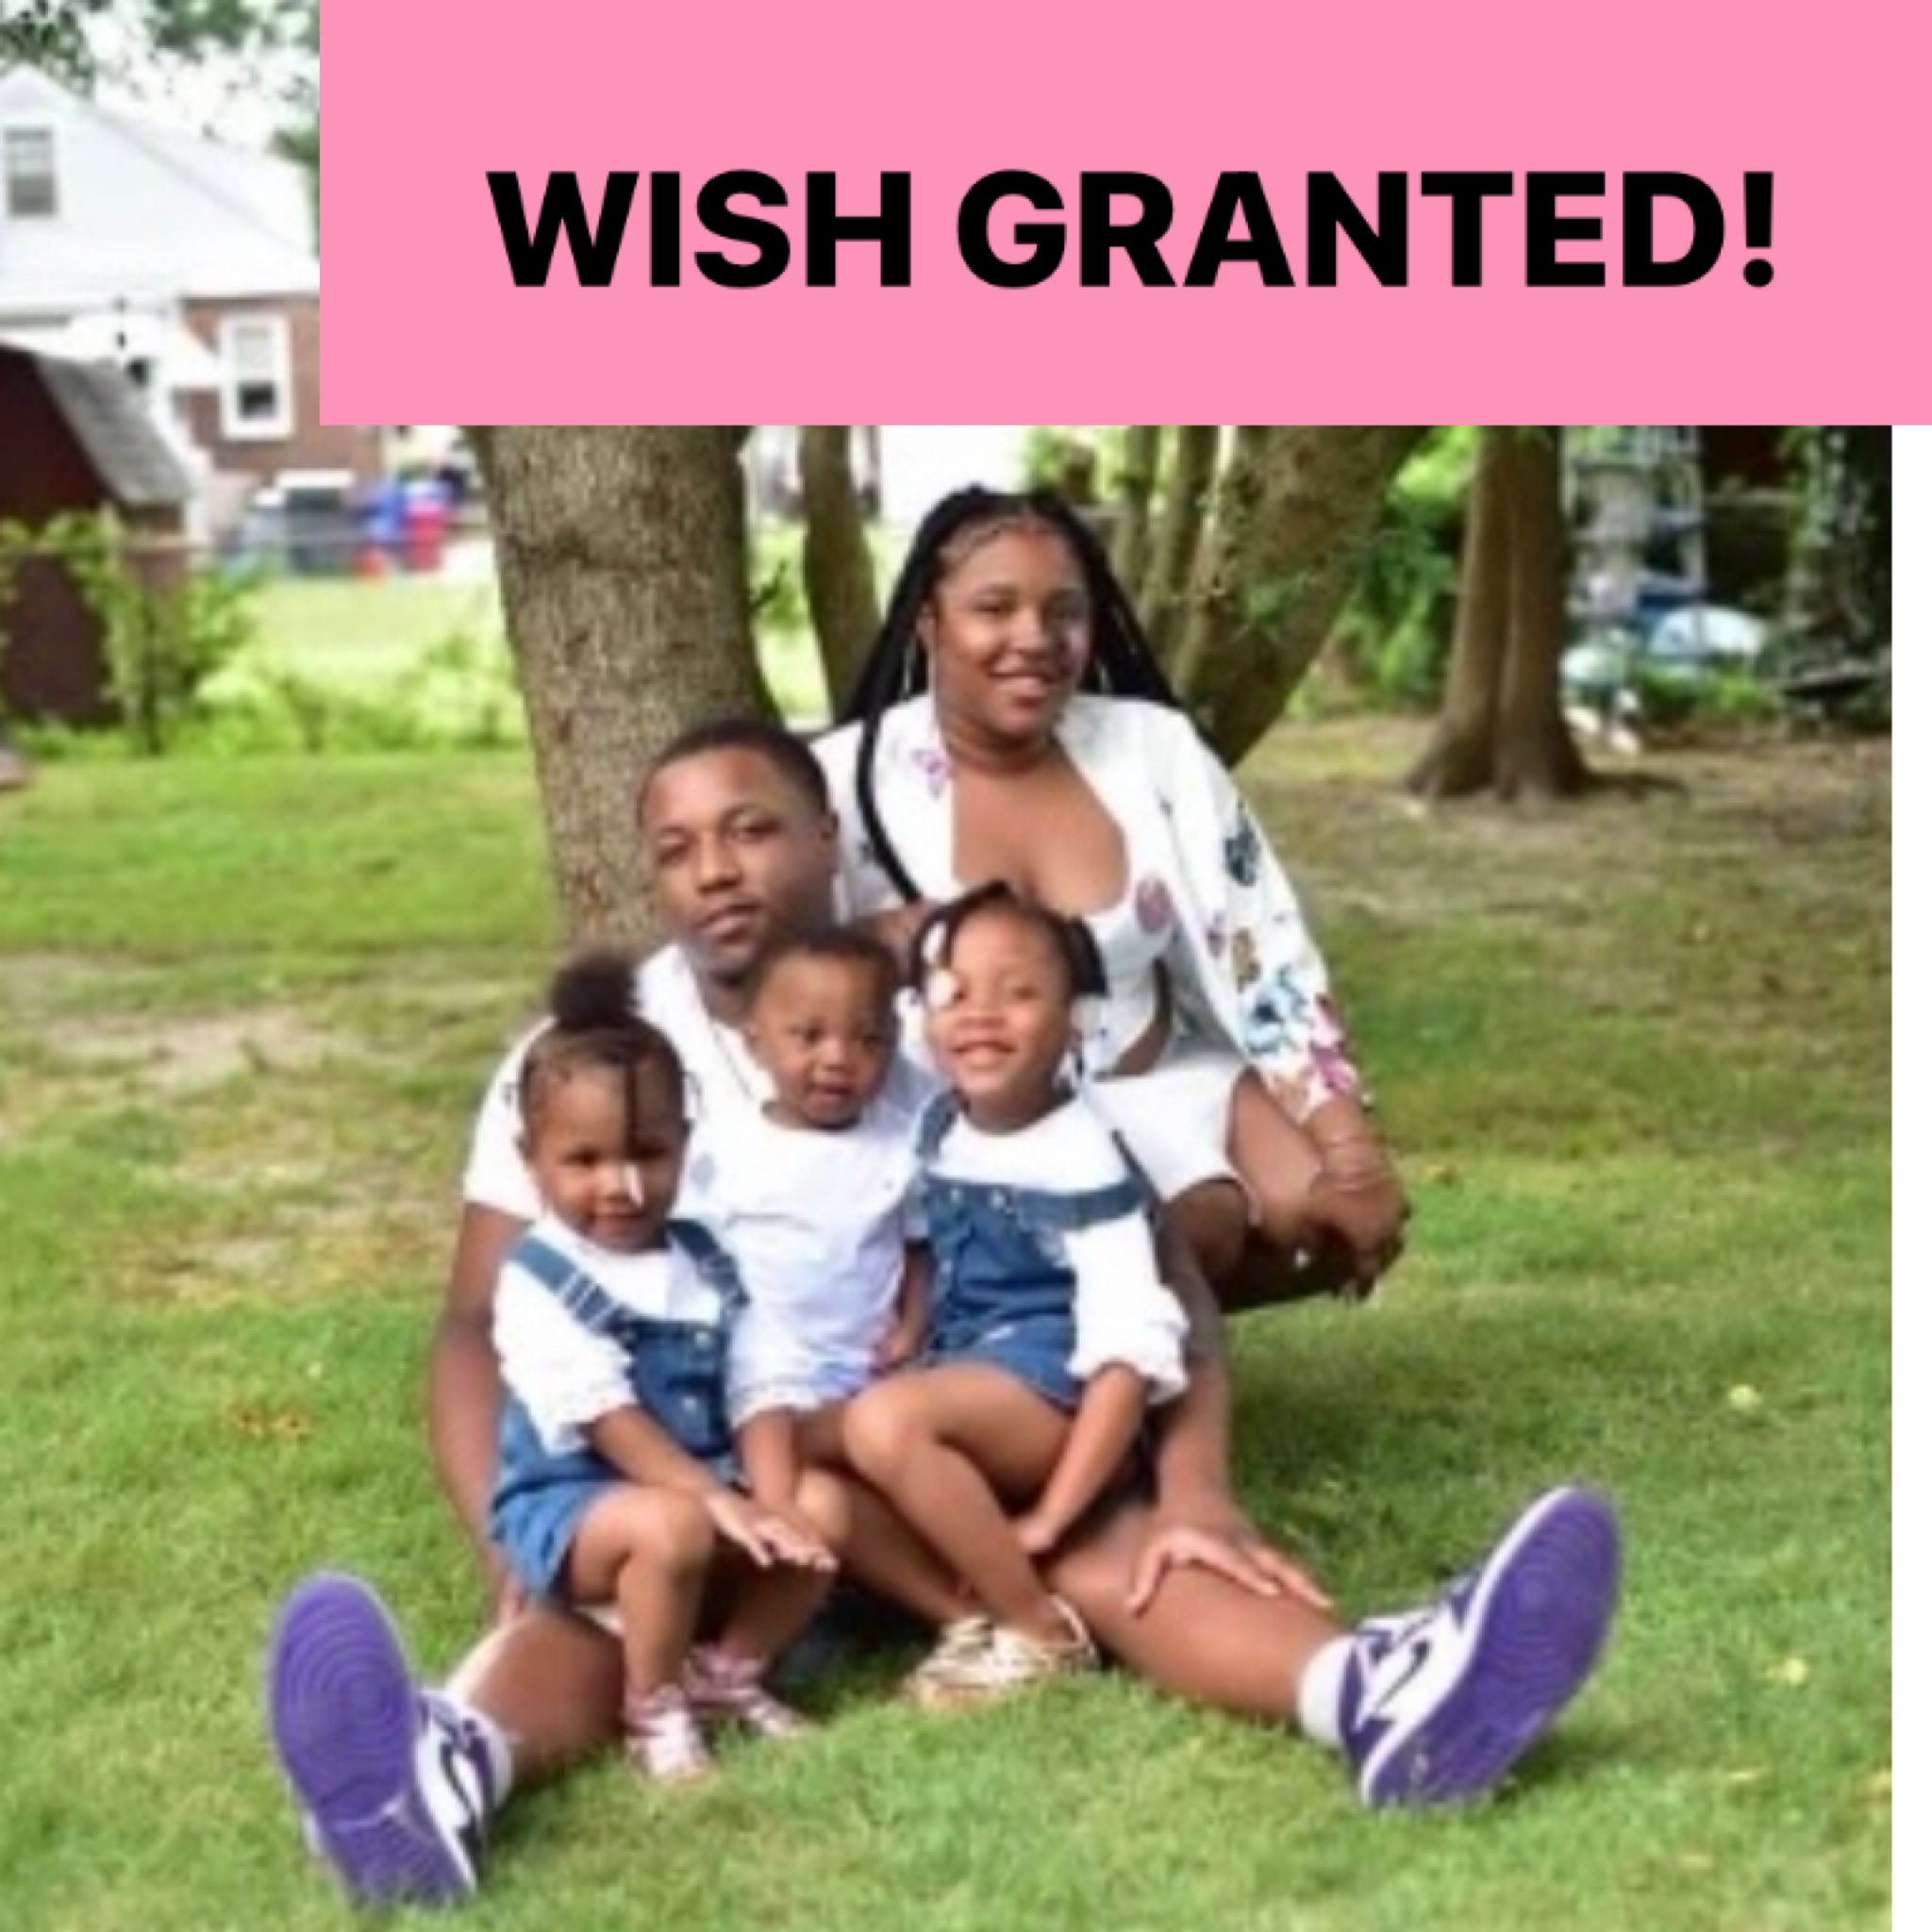 WISH GRANTED FOR FAMILY WHO LOST EVERYTHING IN A HOUSE FIRE.